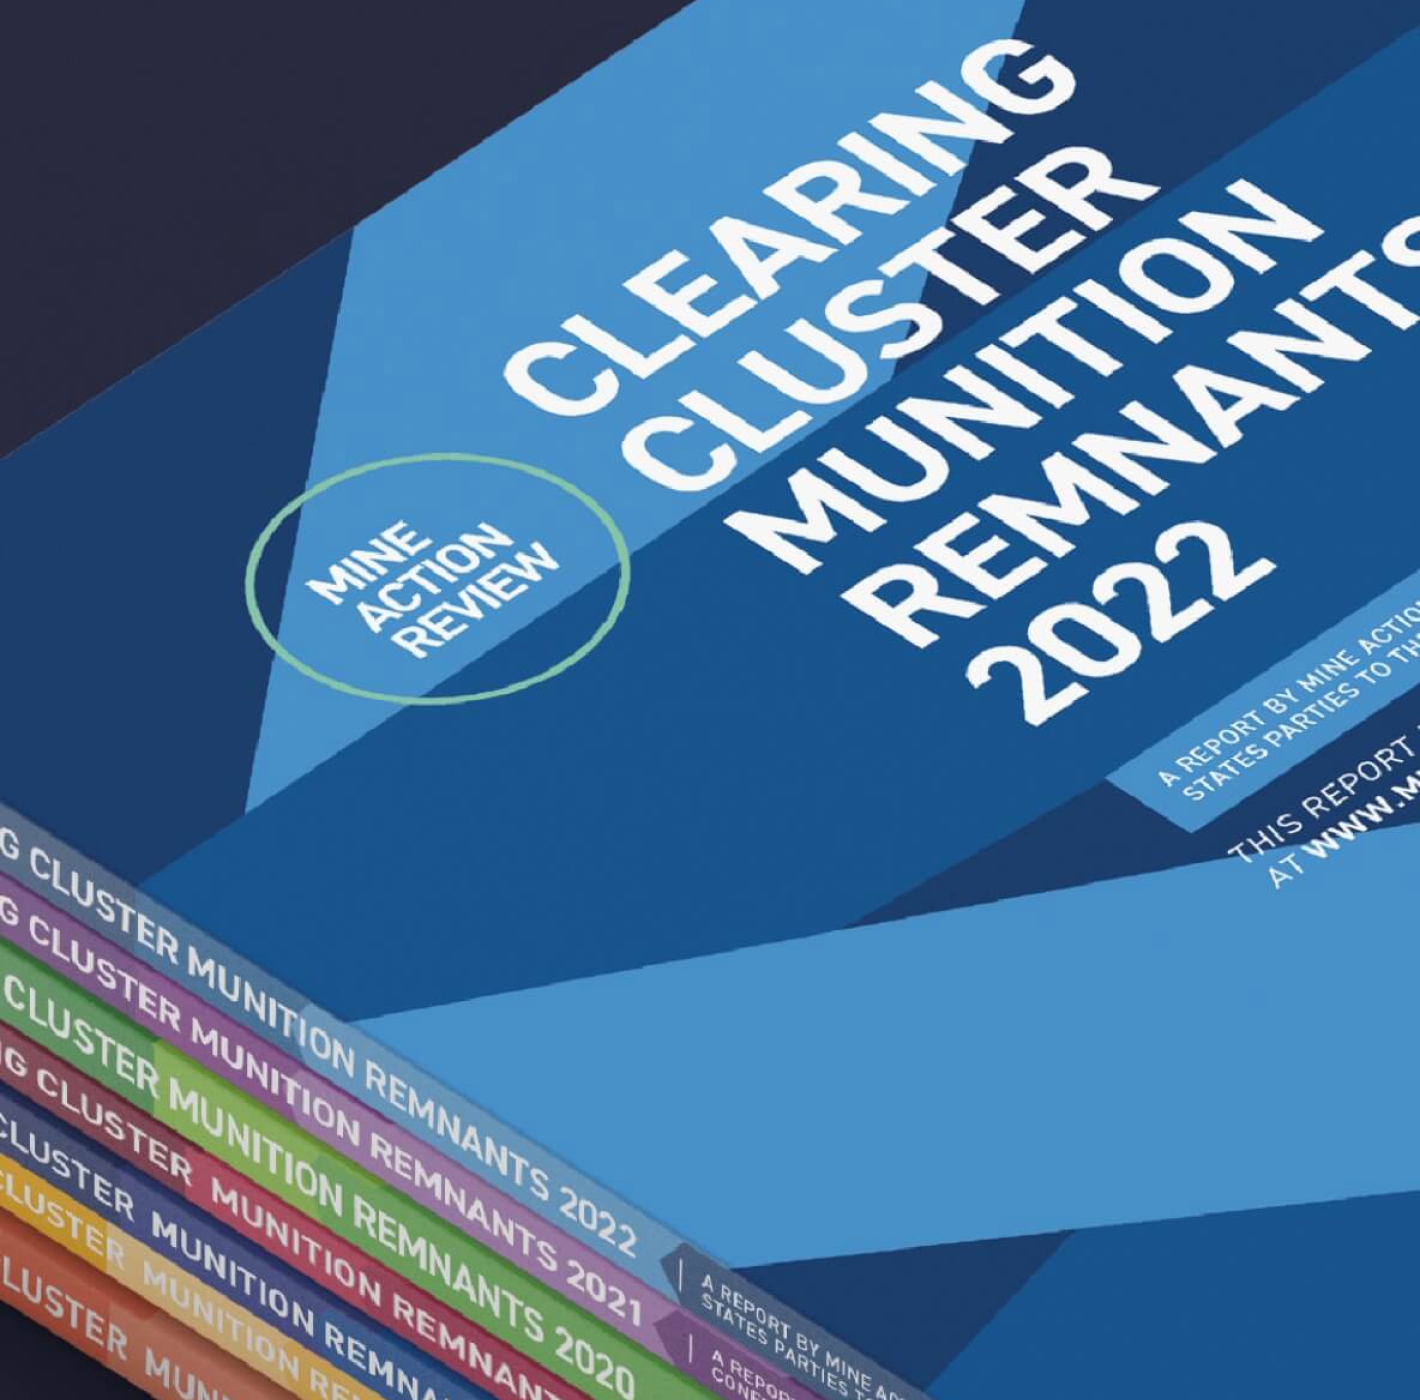 Mine Action Review Clearing Cluster Munition Report 2022